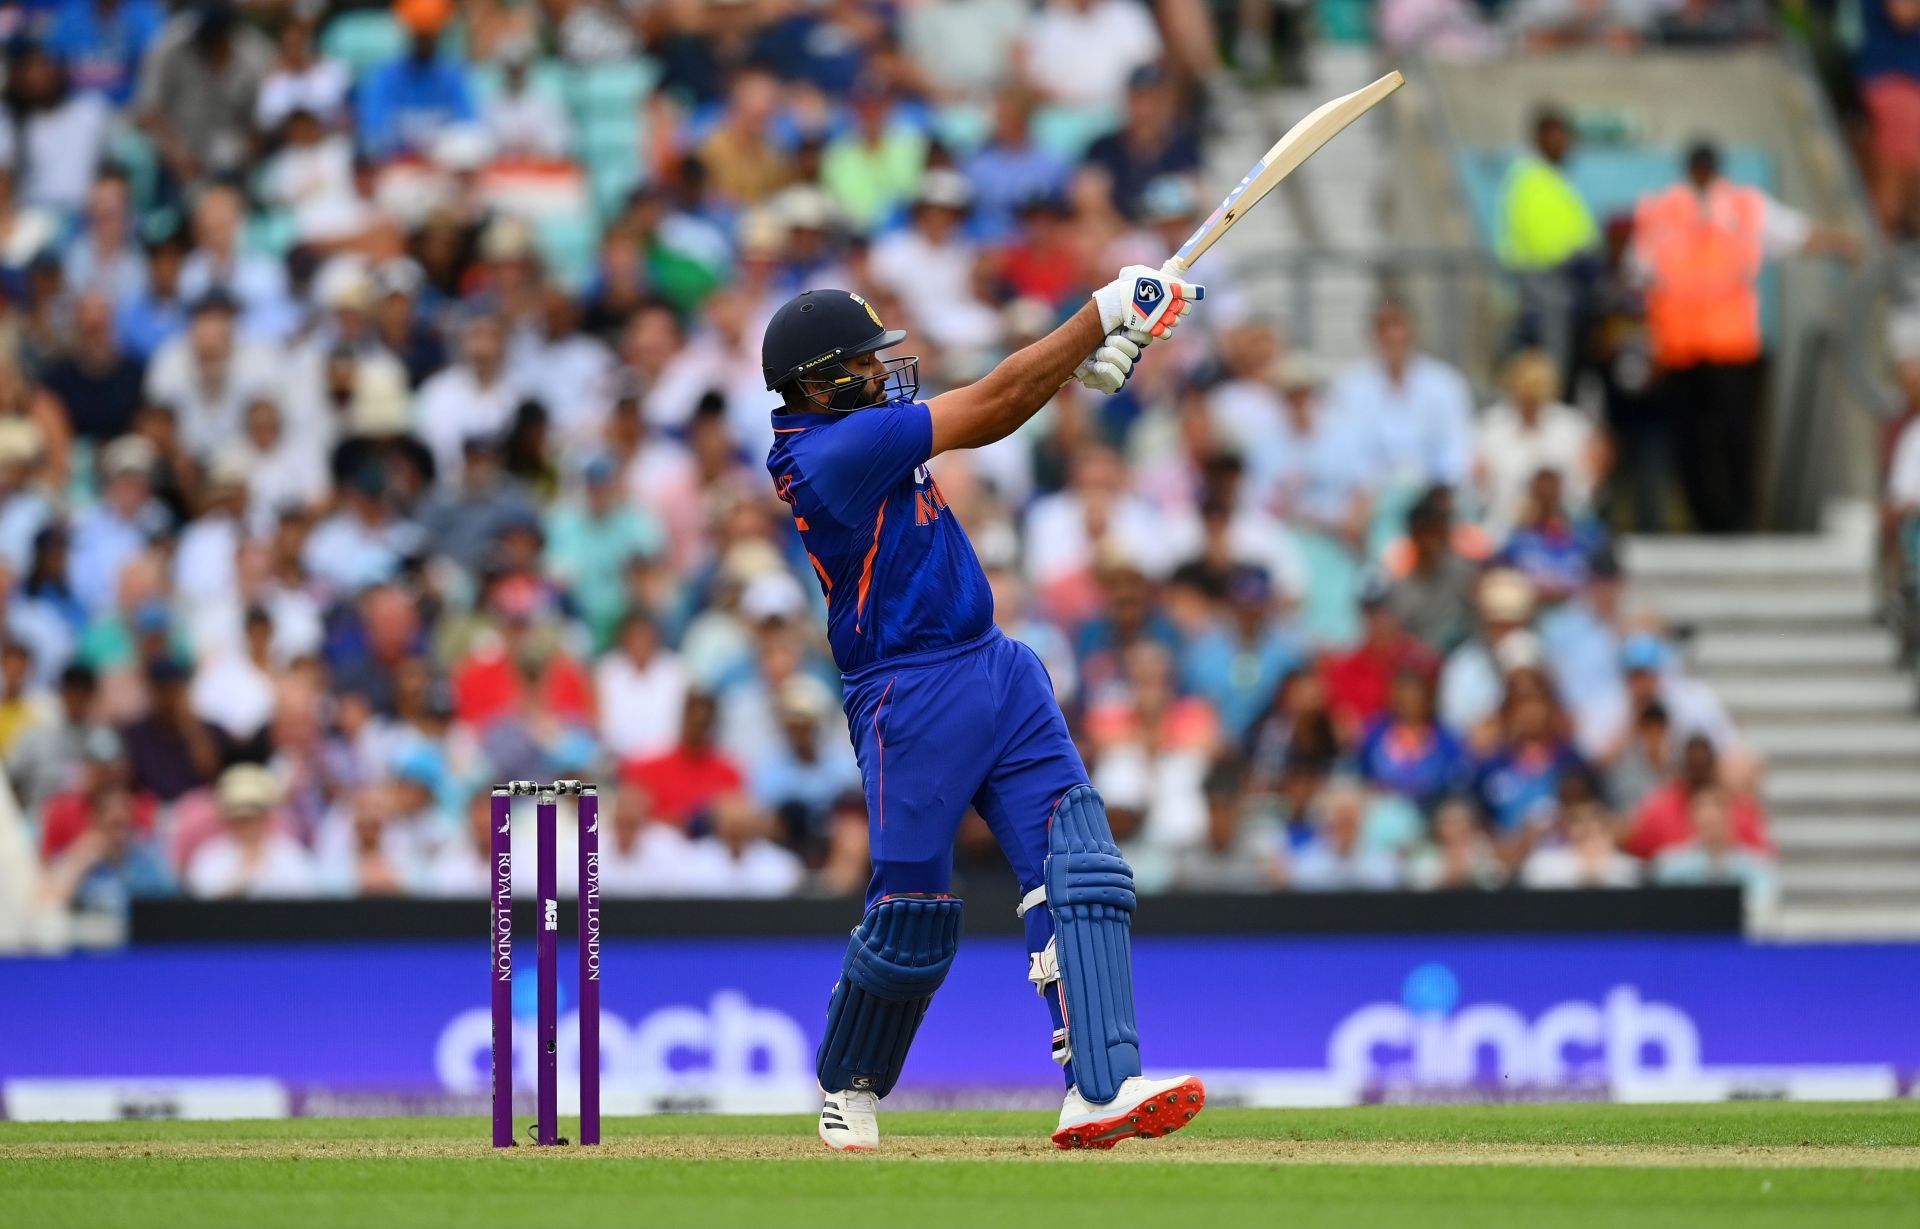 Rohit will need to set an early template in the T20 World Cup